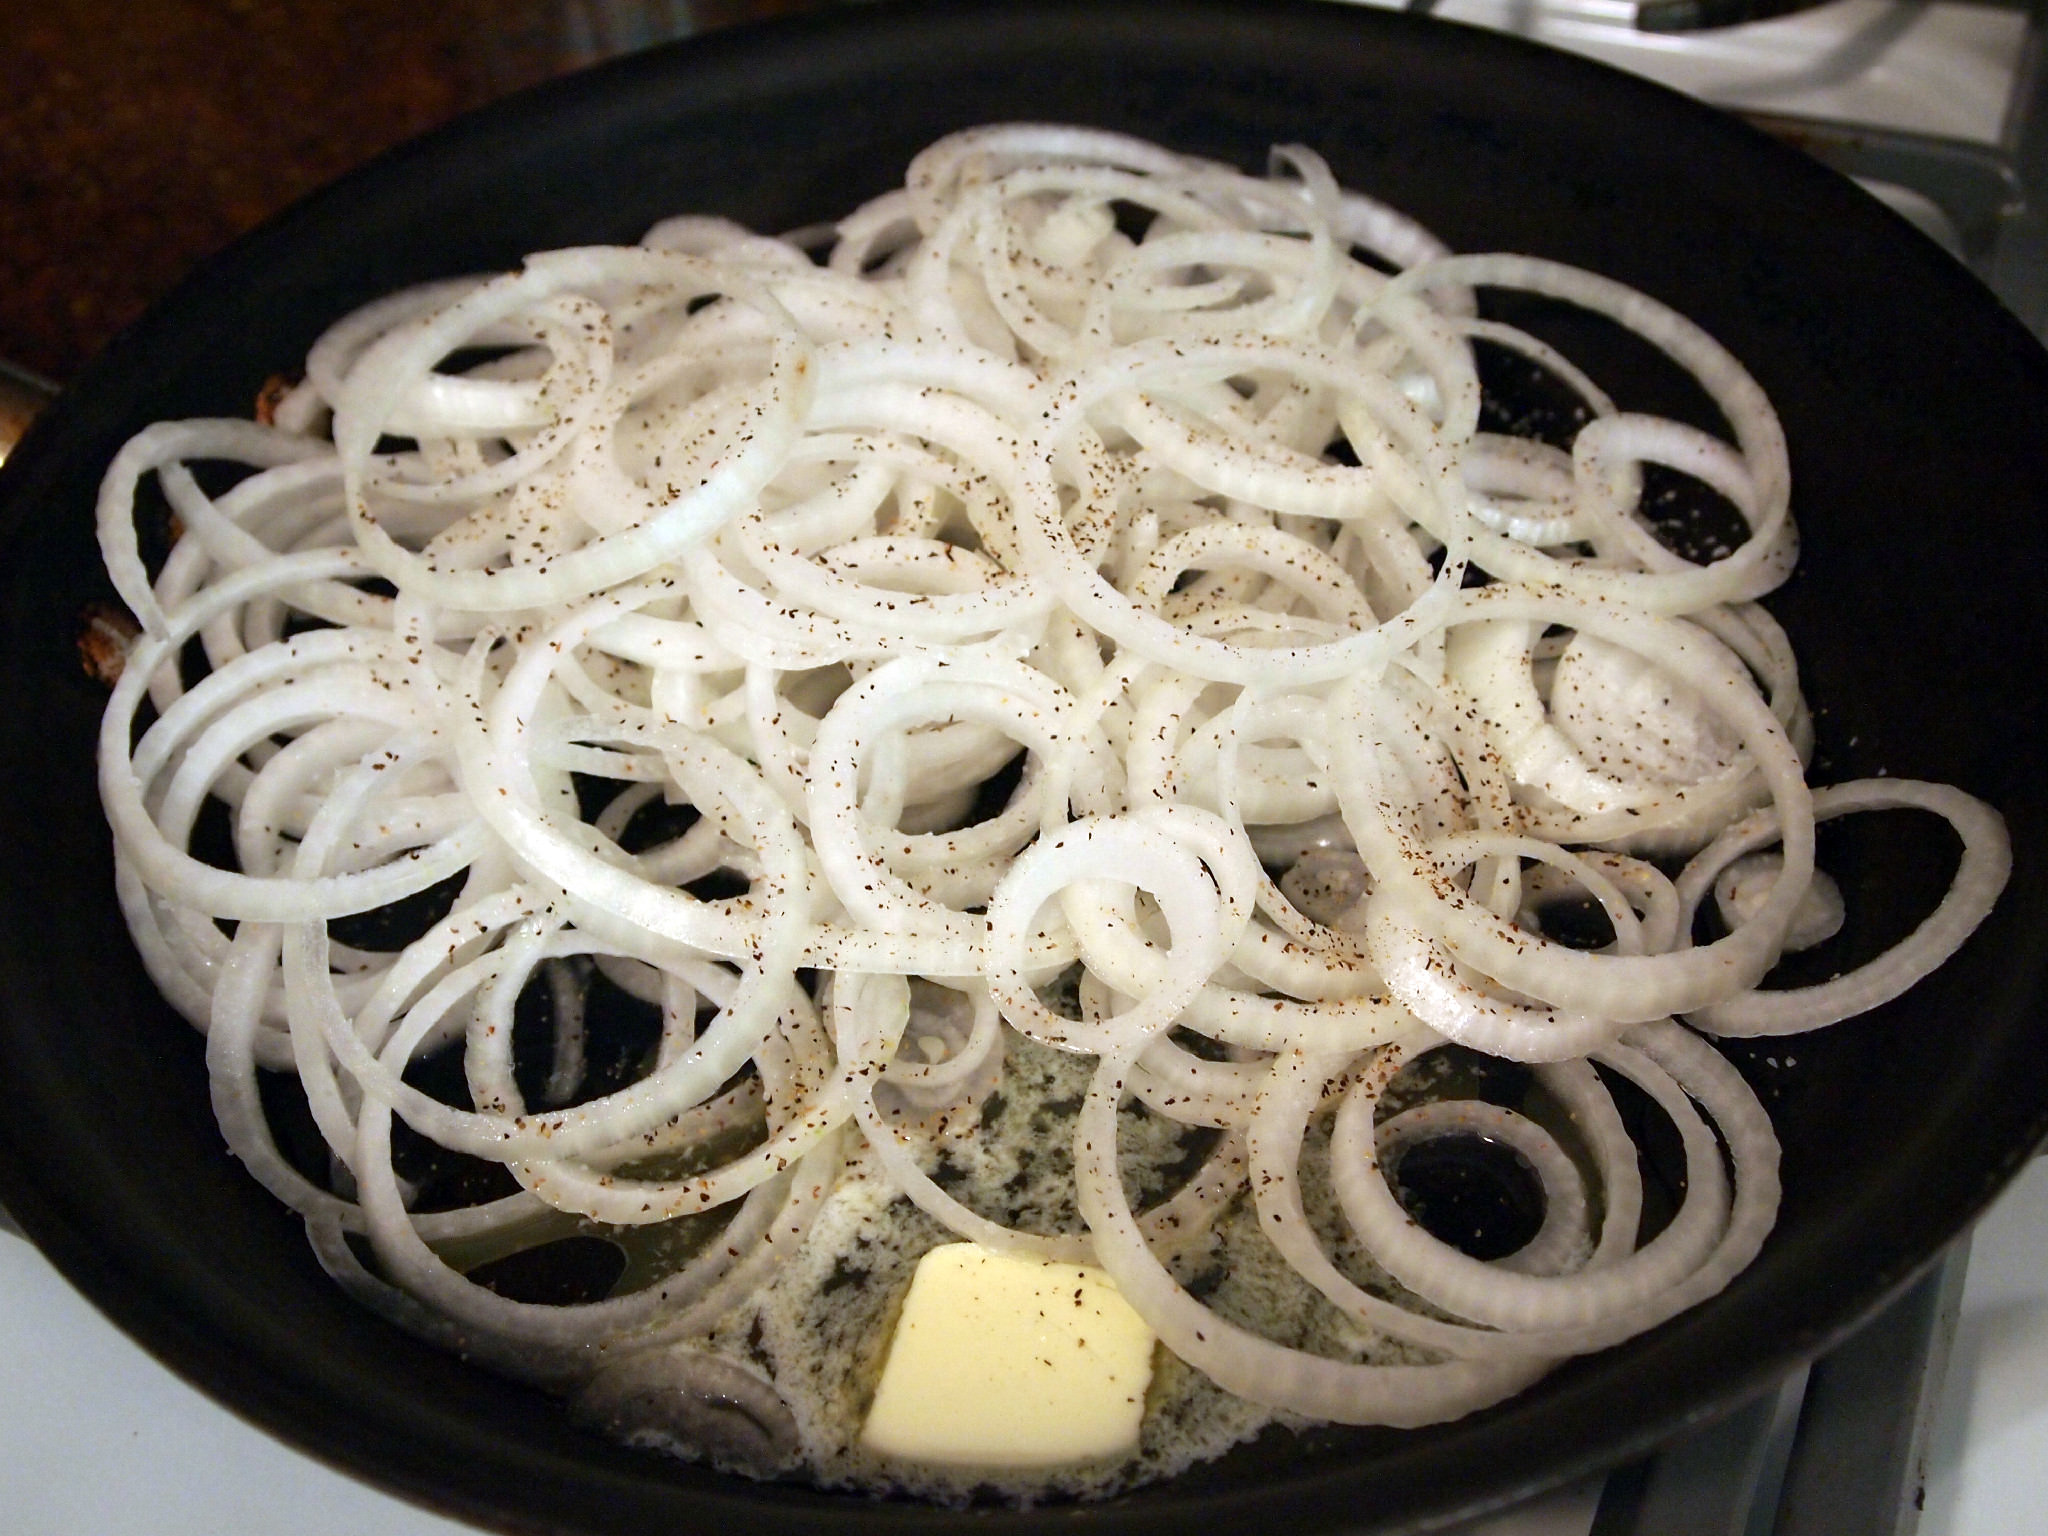 onions in butter